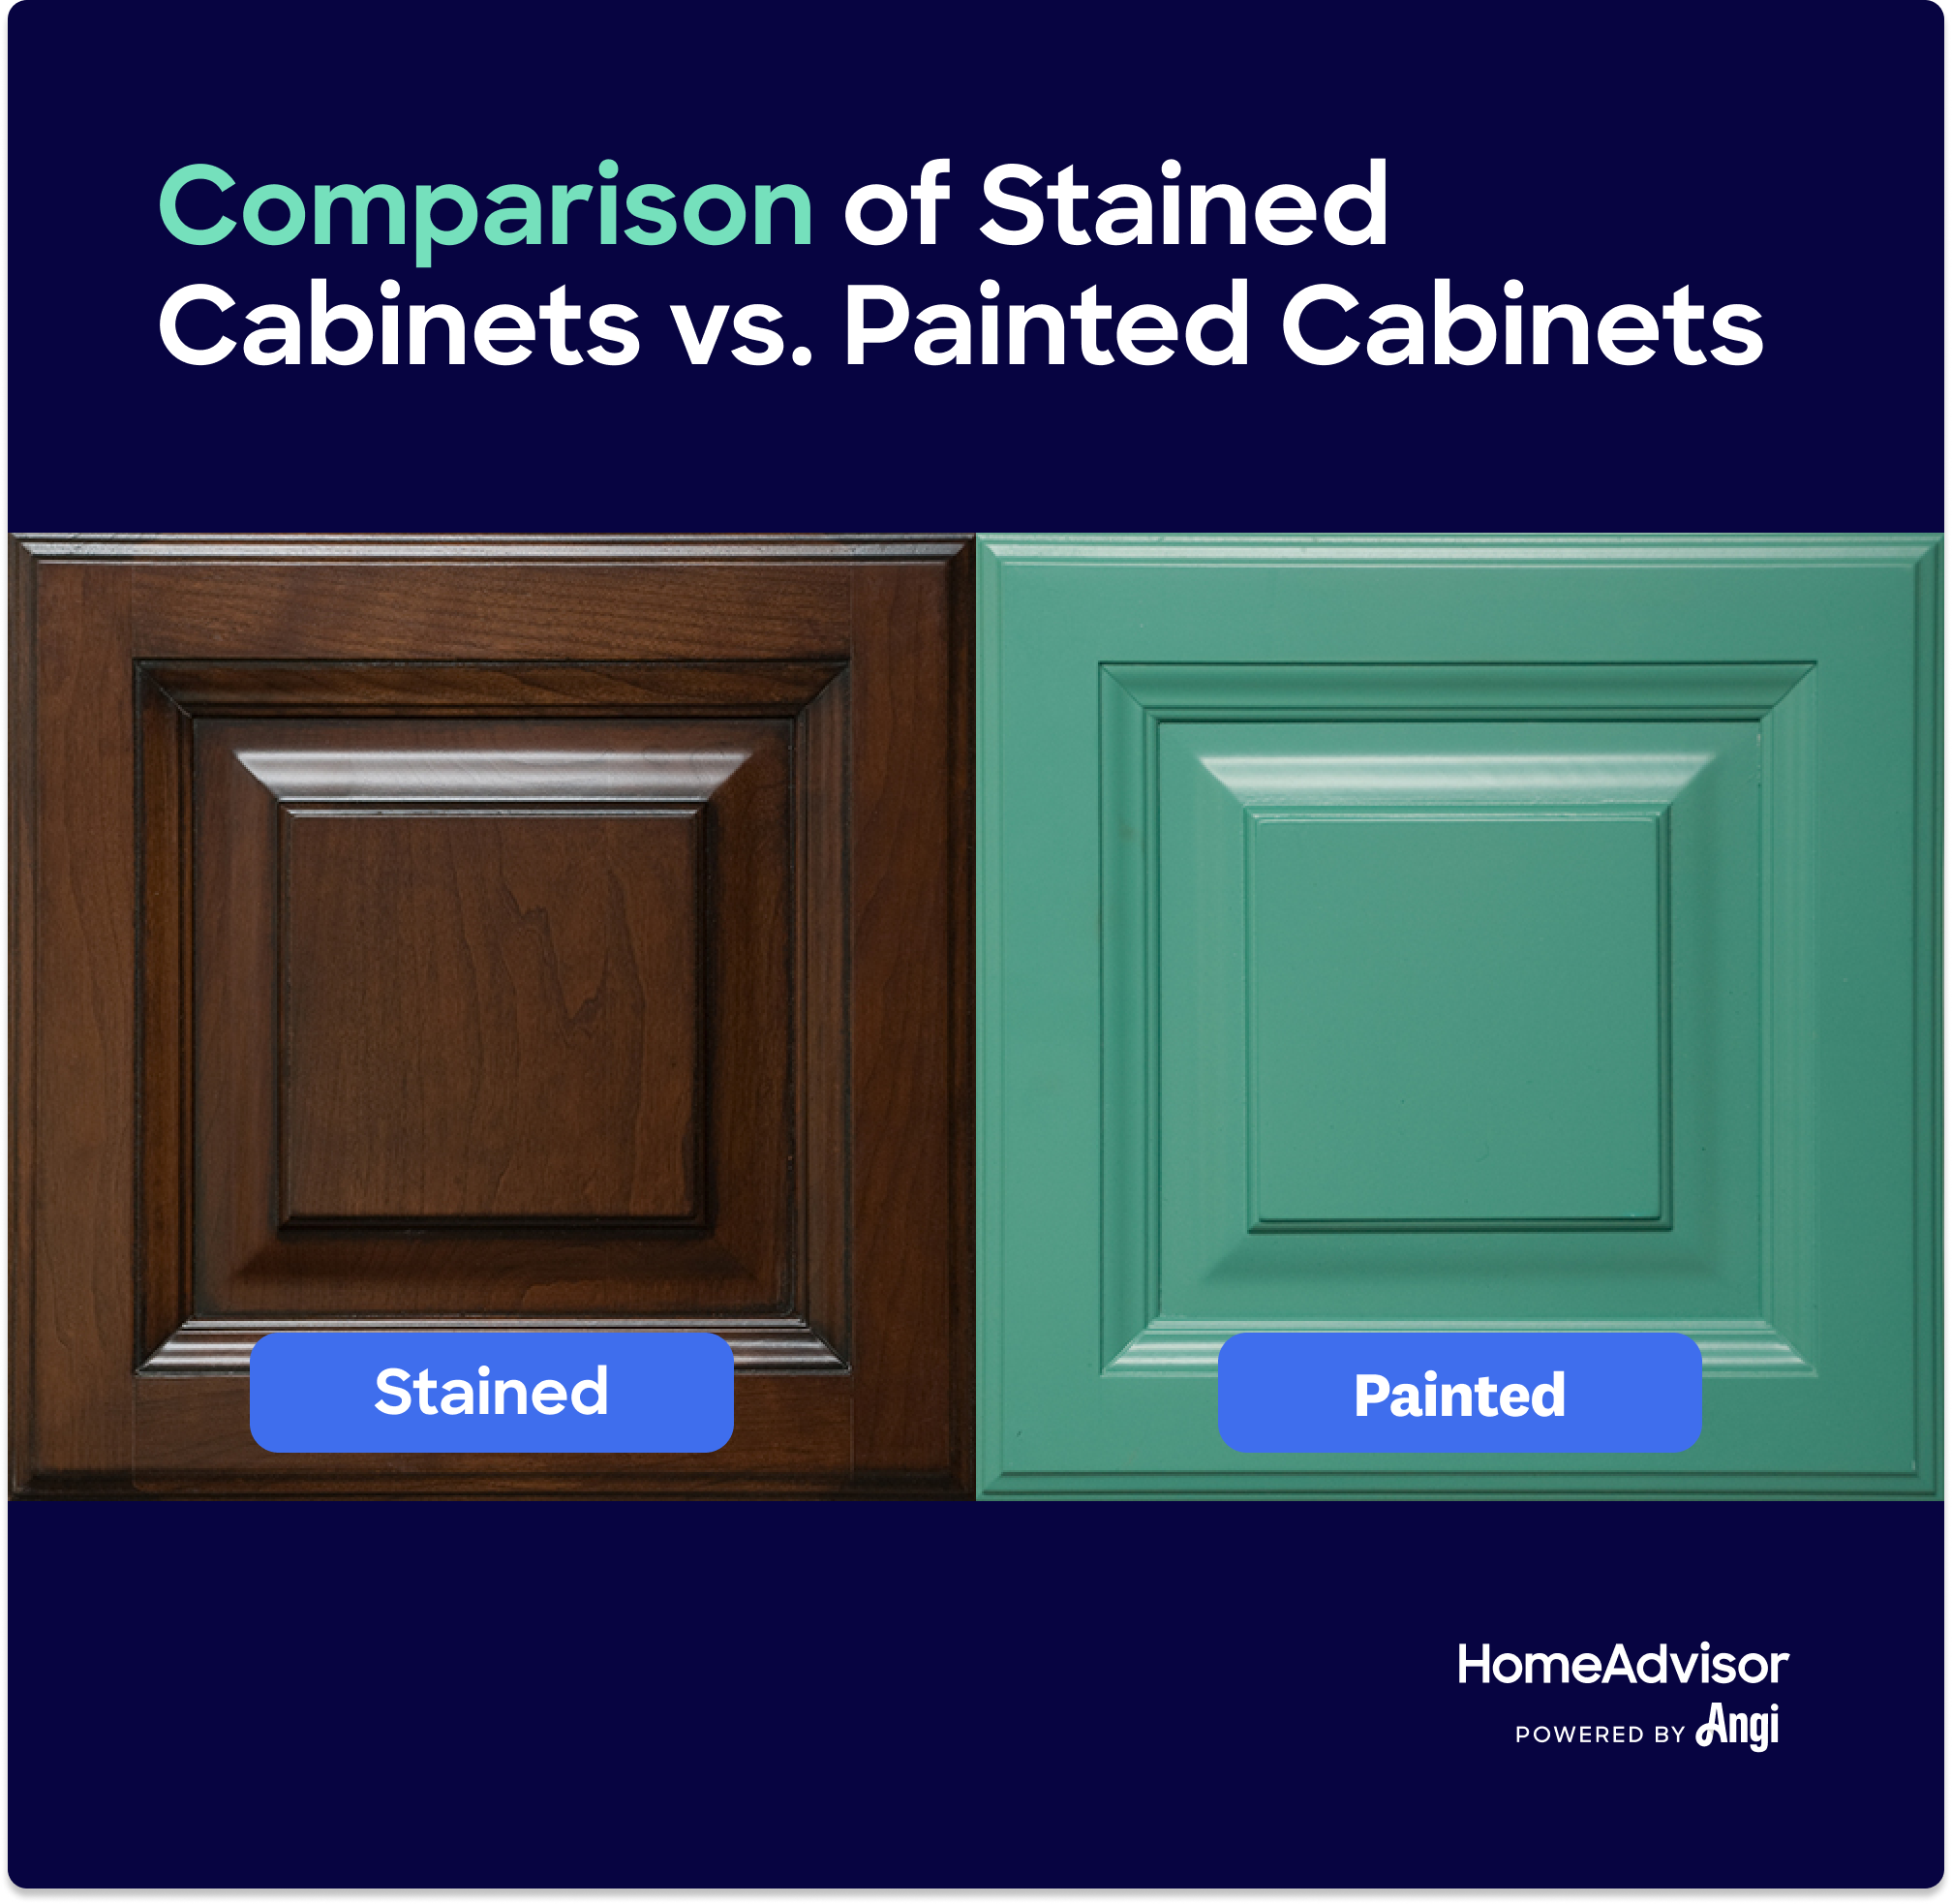 Visual comparison of stained cabinets versus painted cabinets